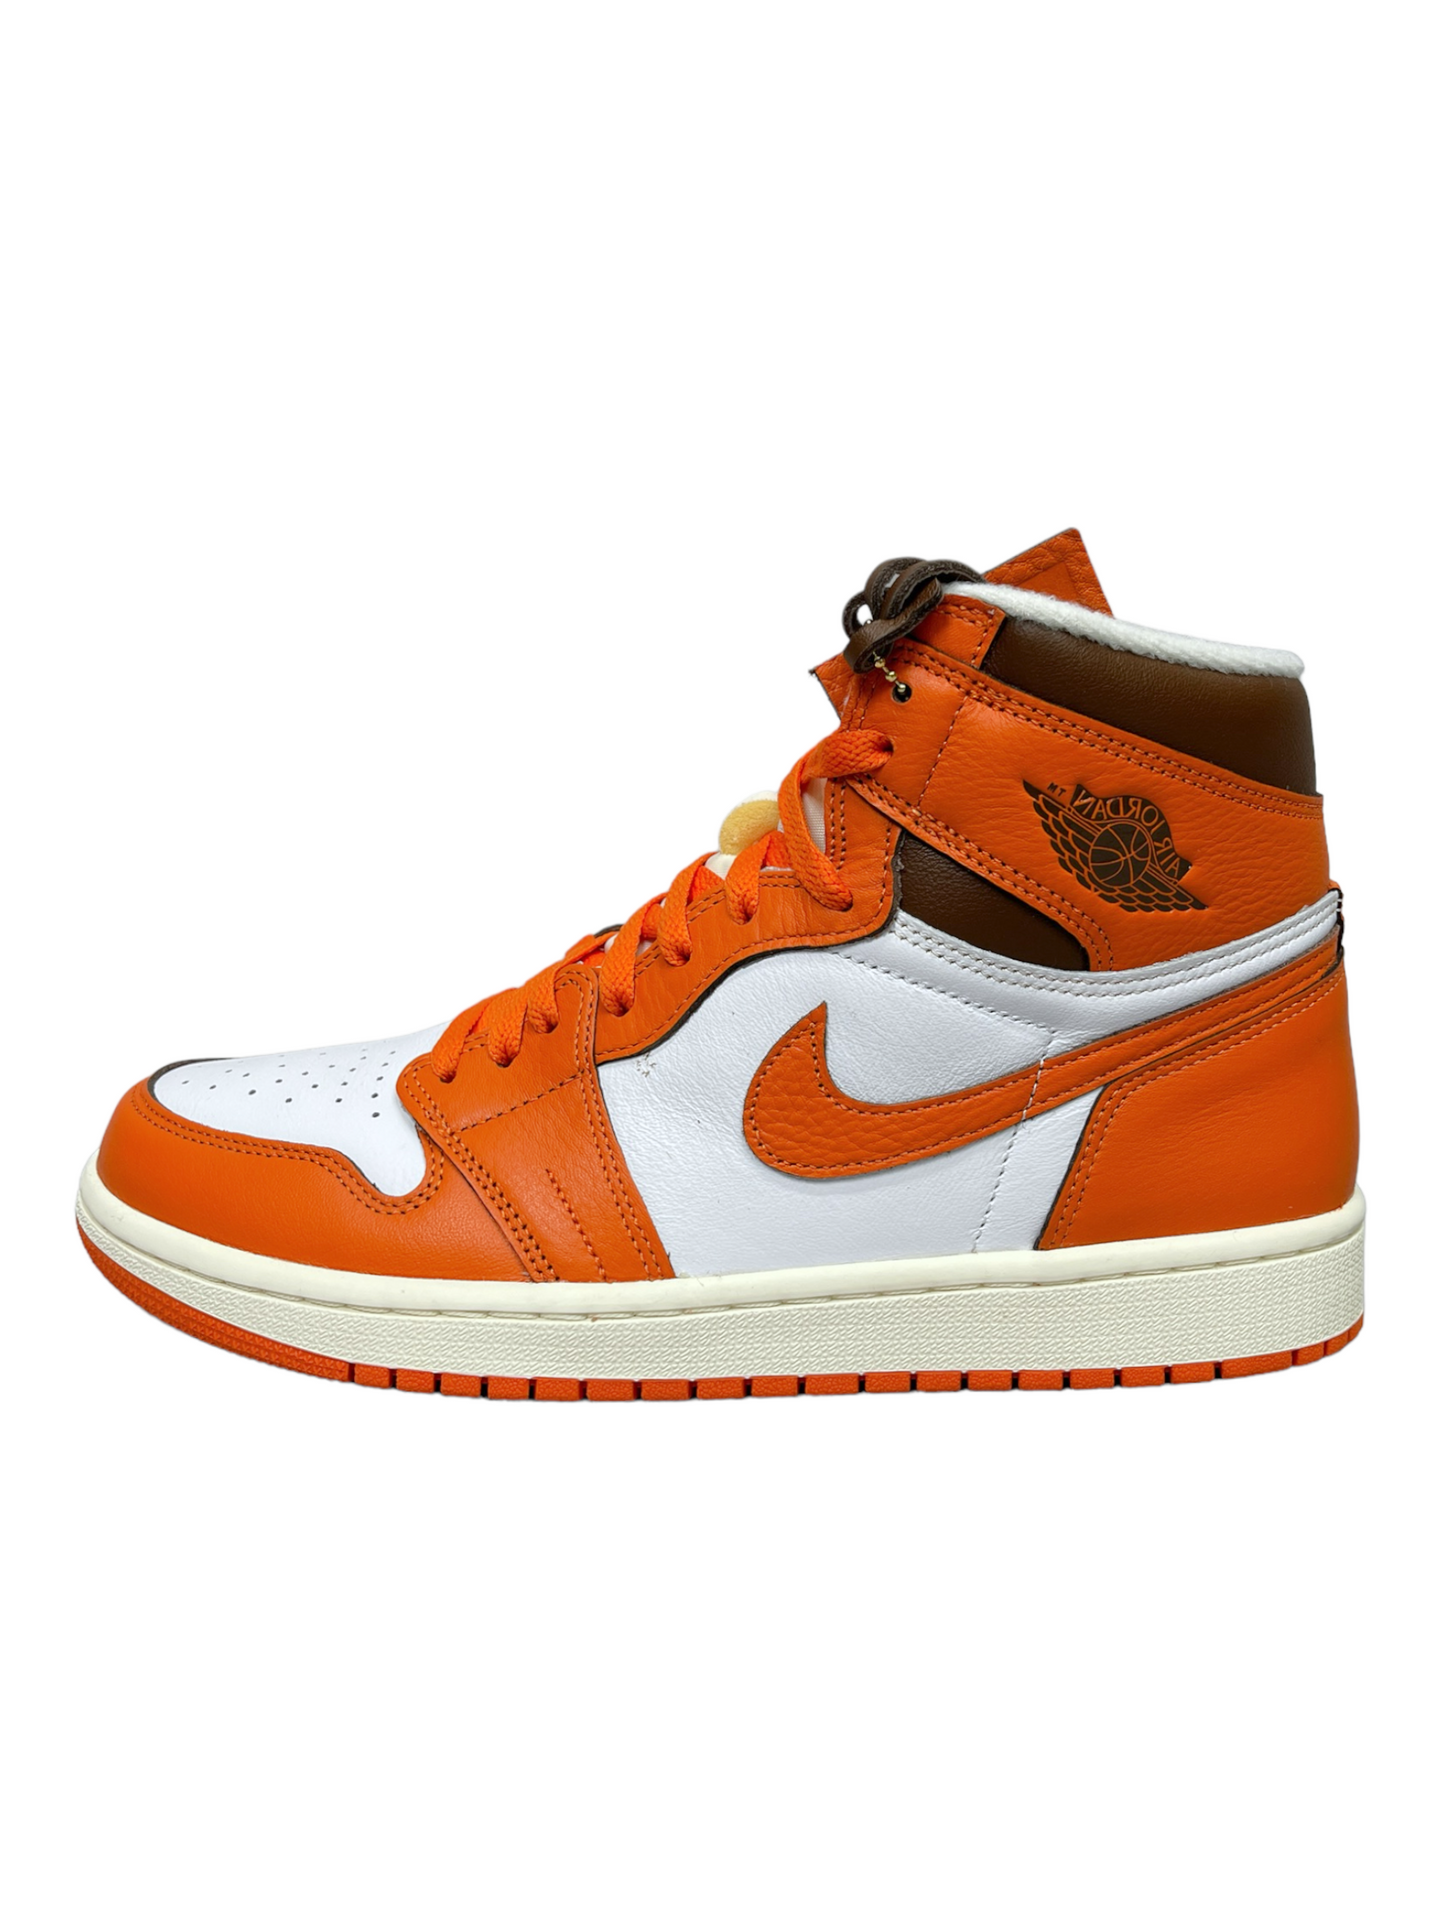 Jordan 1 Retro High OG Starfish - Genuine Design Luxury Consignment for Men. New & Pre-Owned Clothing, Shoes, & Accessories. Calgary, Canada